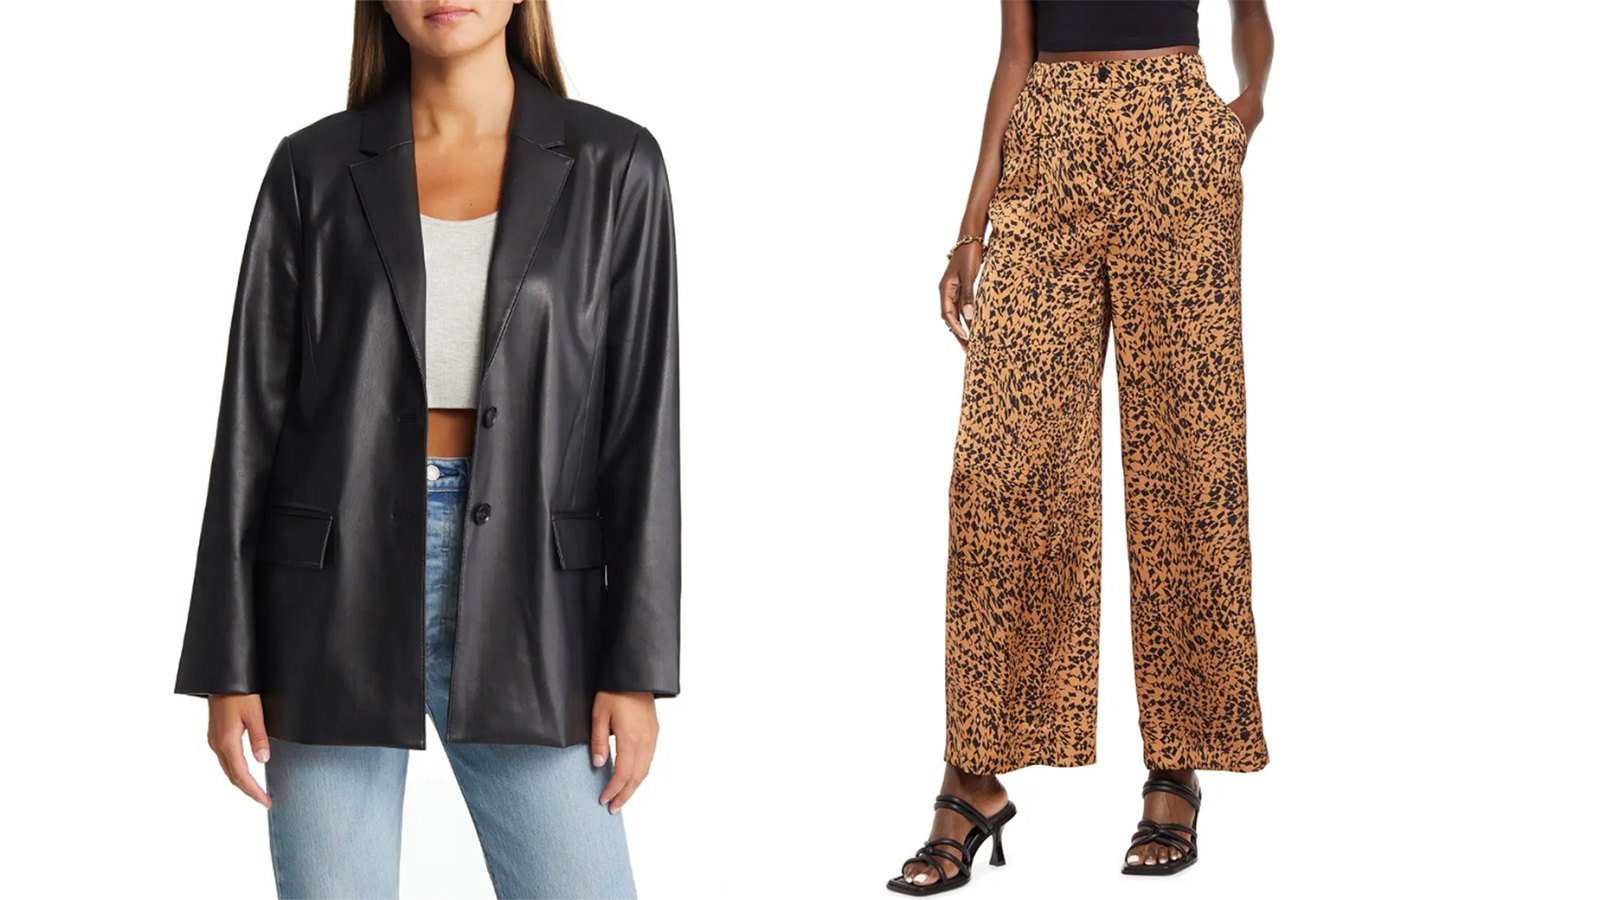 Zara-Style Finds in the Nordstrom Anniversary Sale